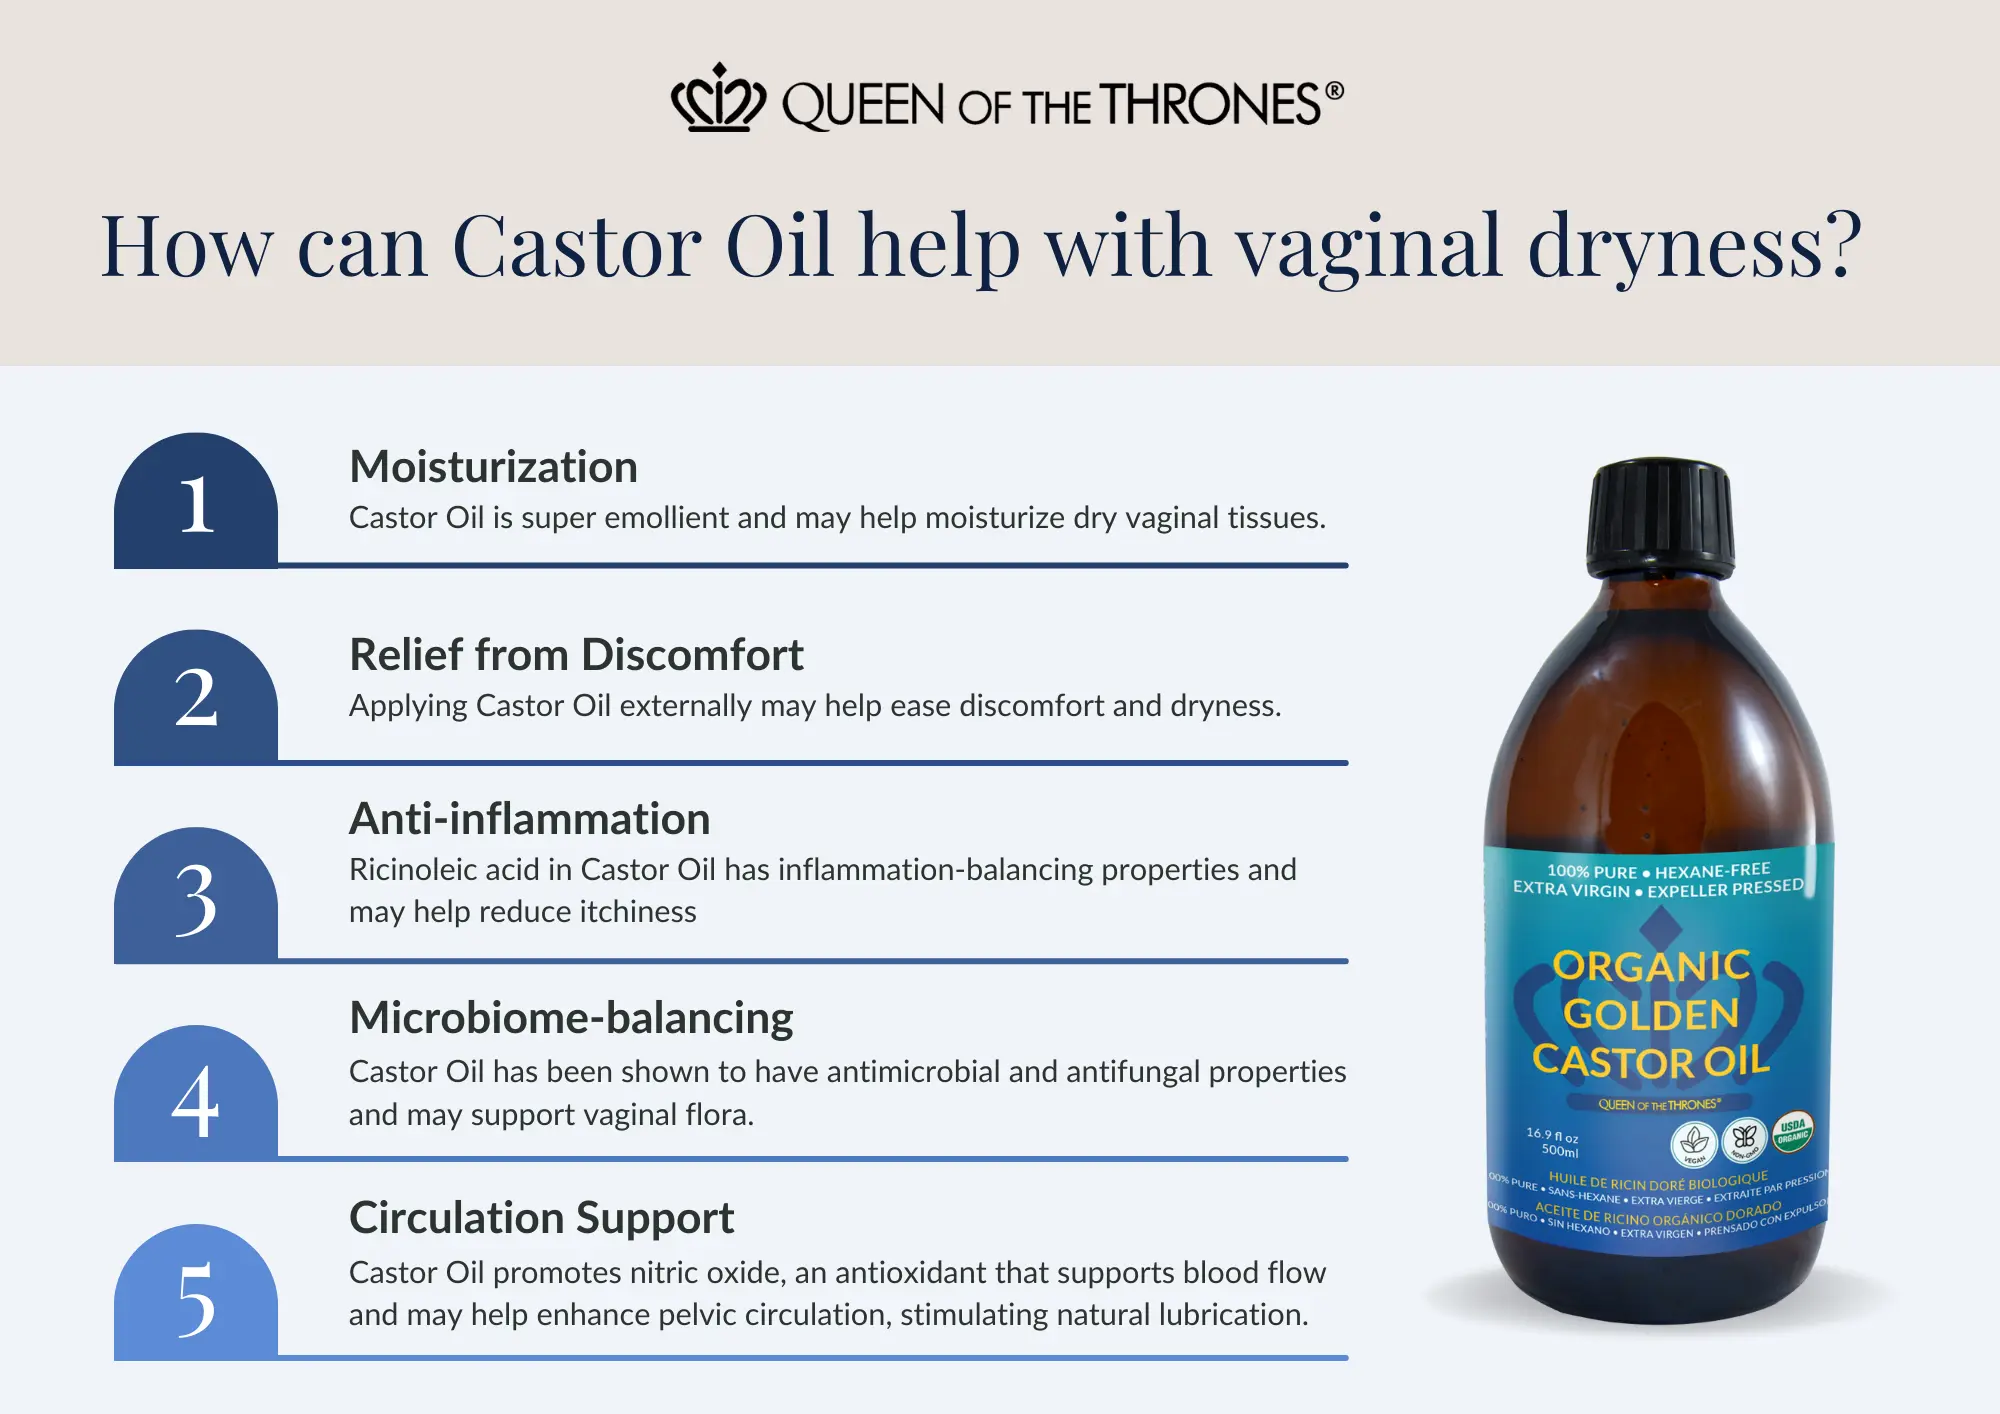 How can Queen of the Thrones Castor oil can help-with vaginal dryness